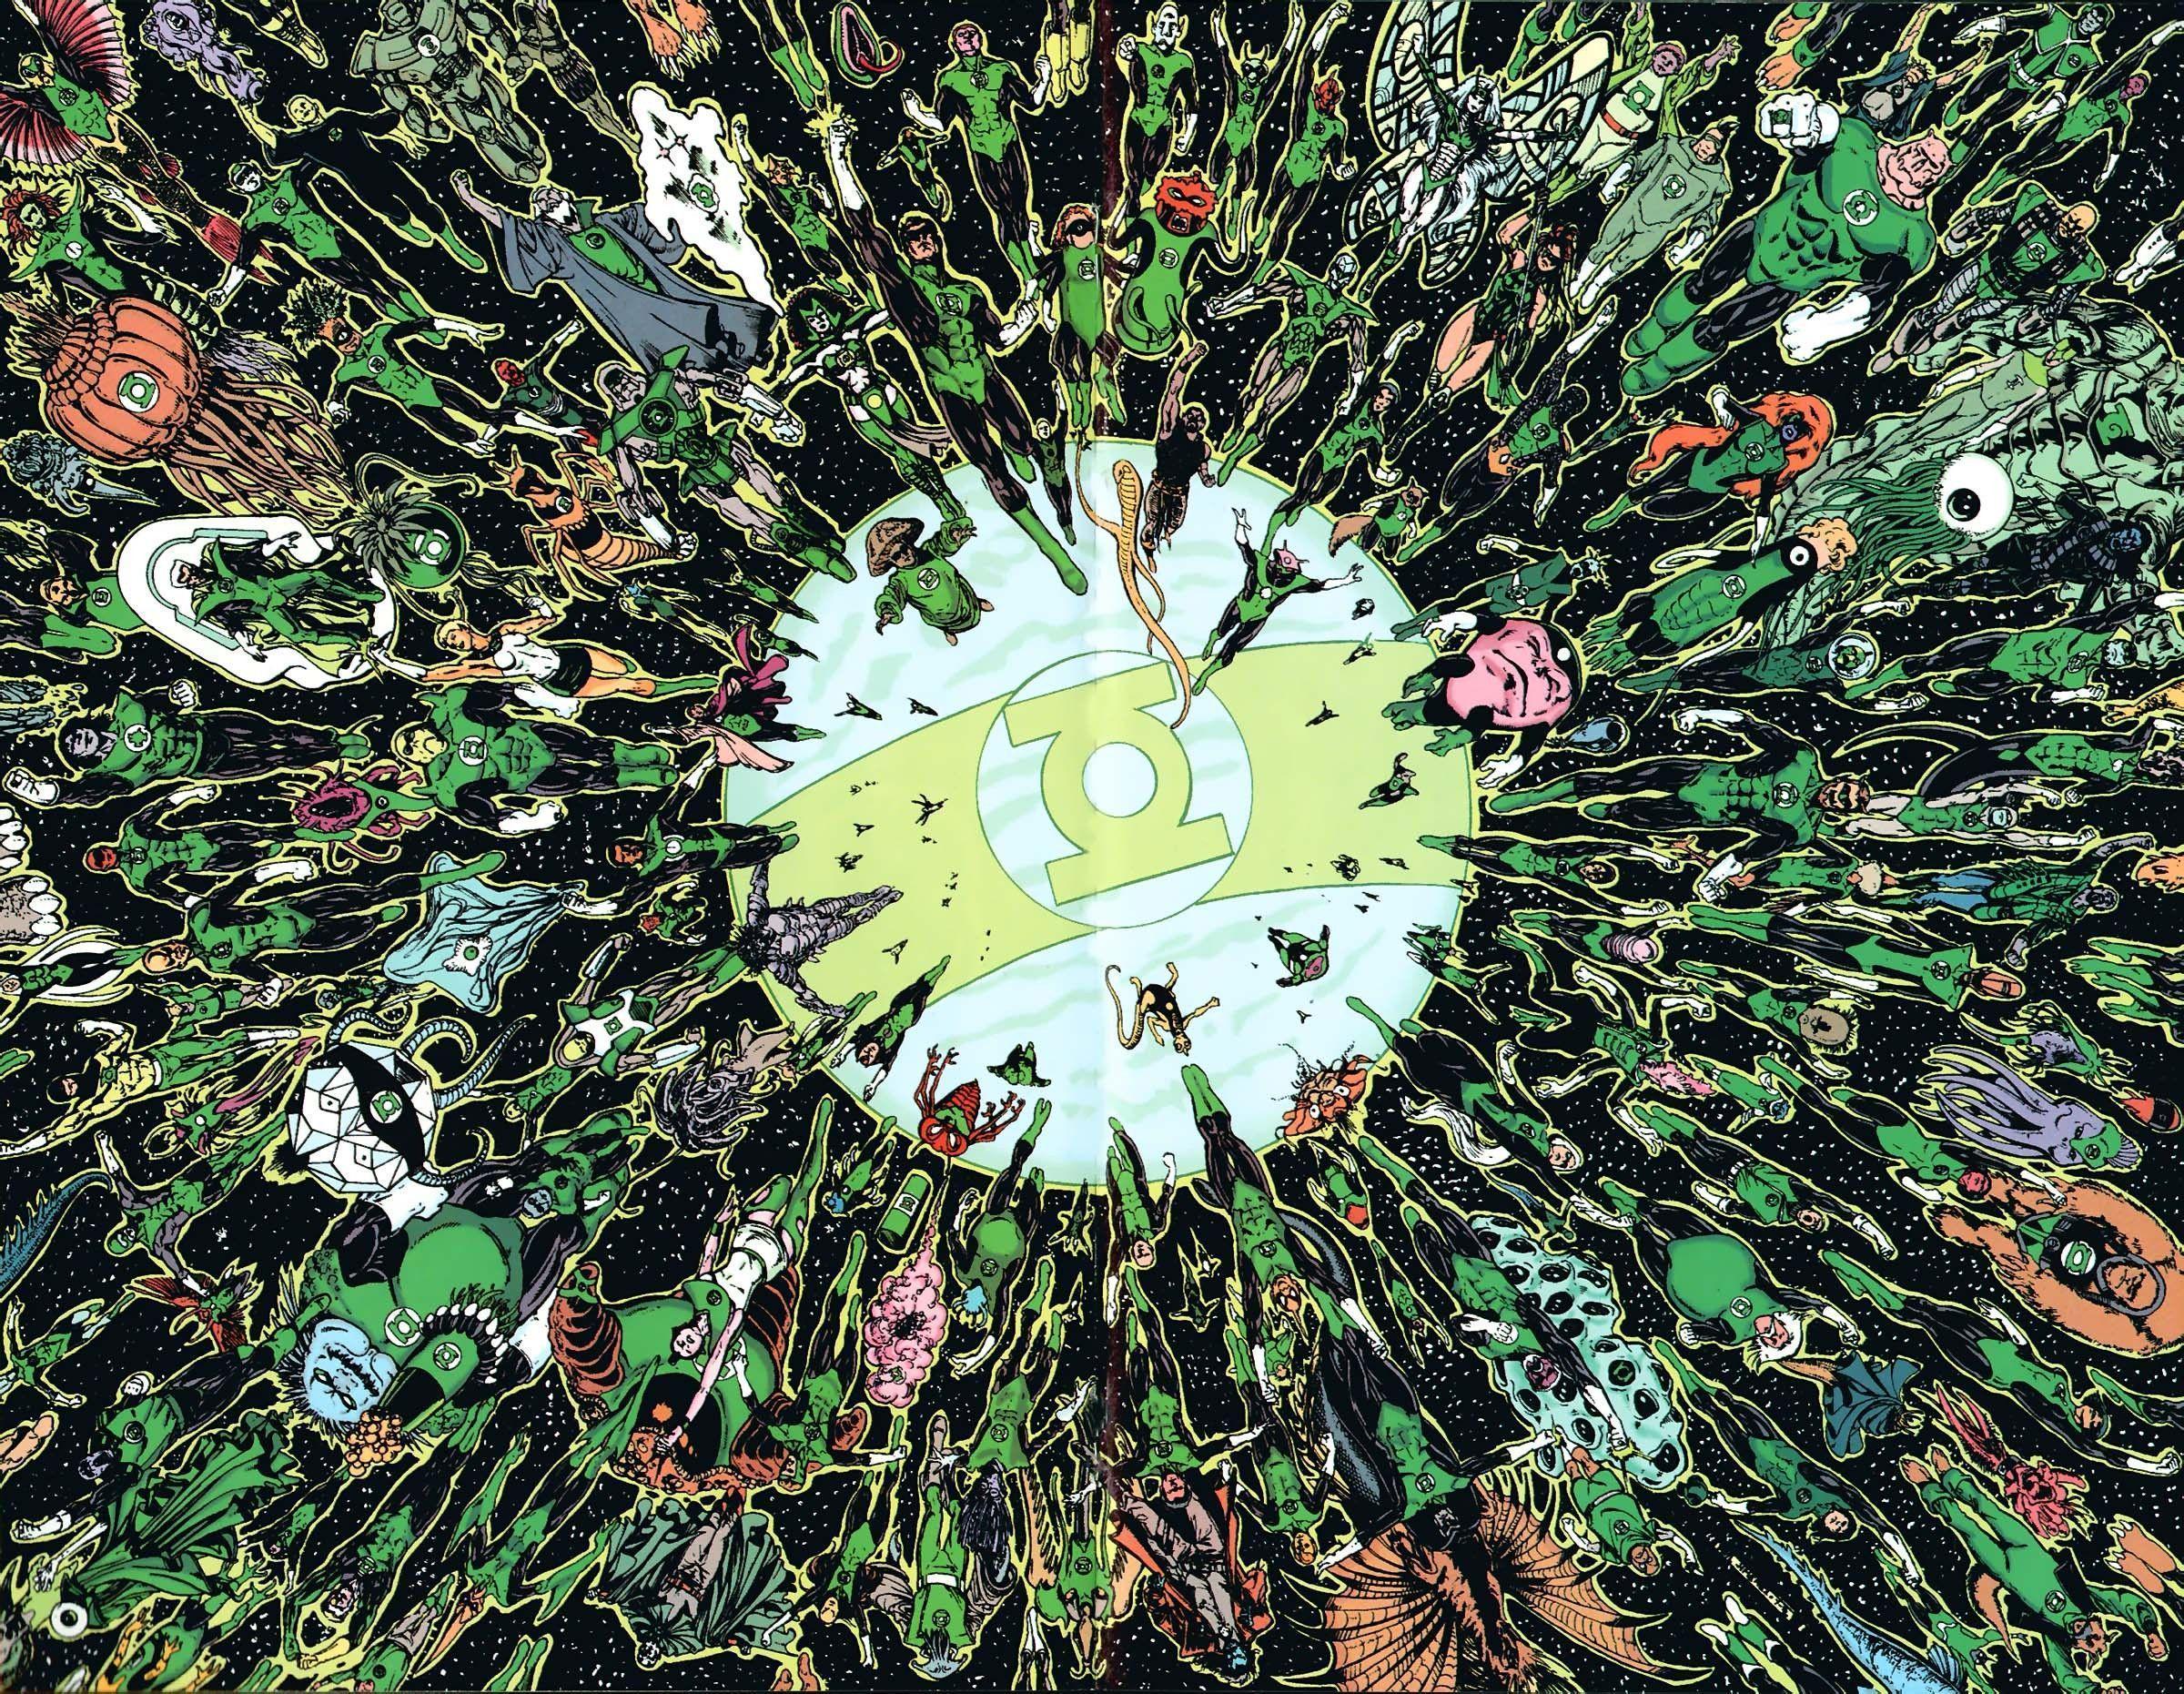 Green Lantern Corps Wallpaper, Picture, Image